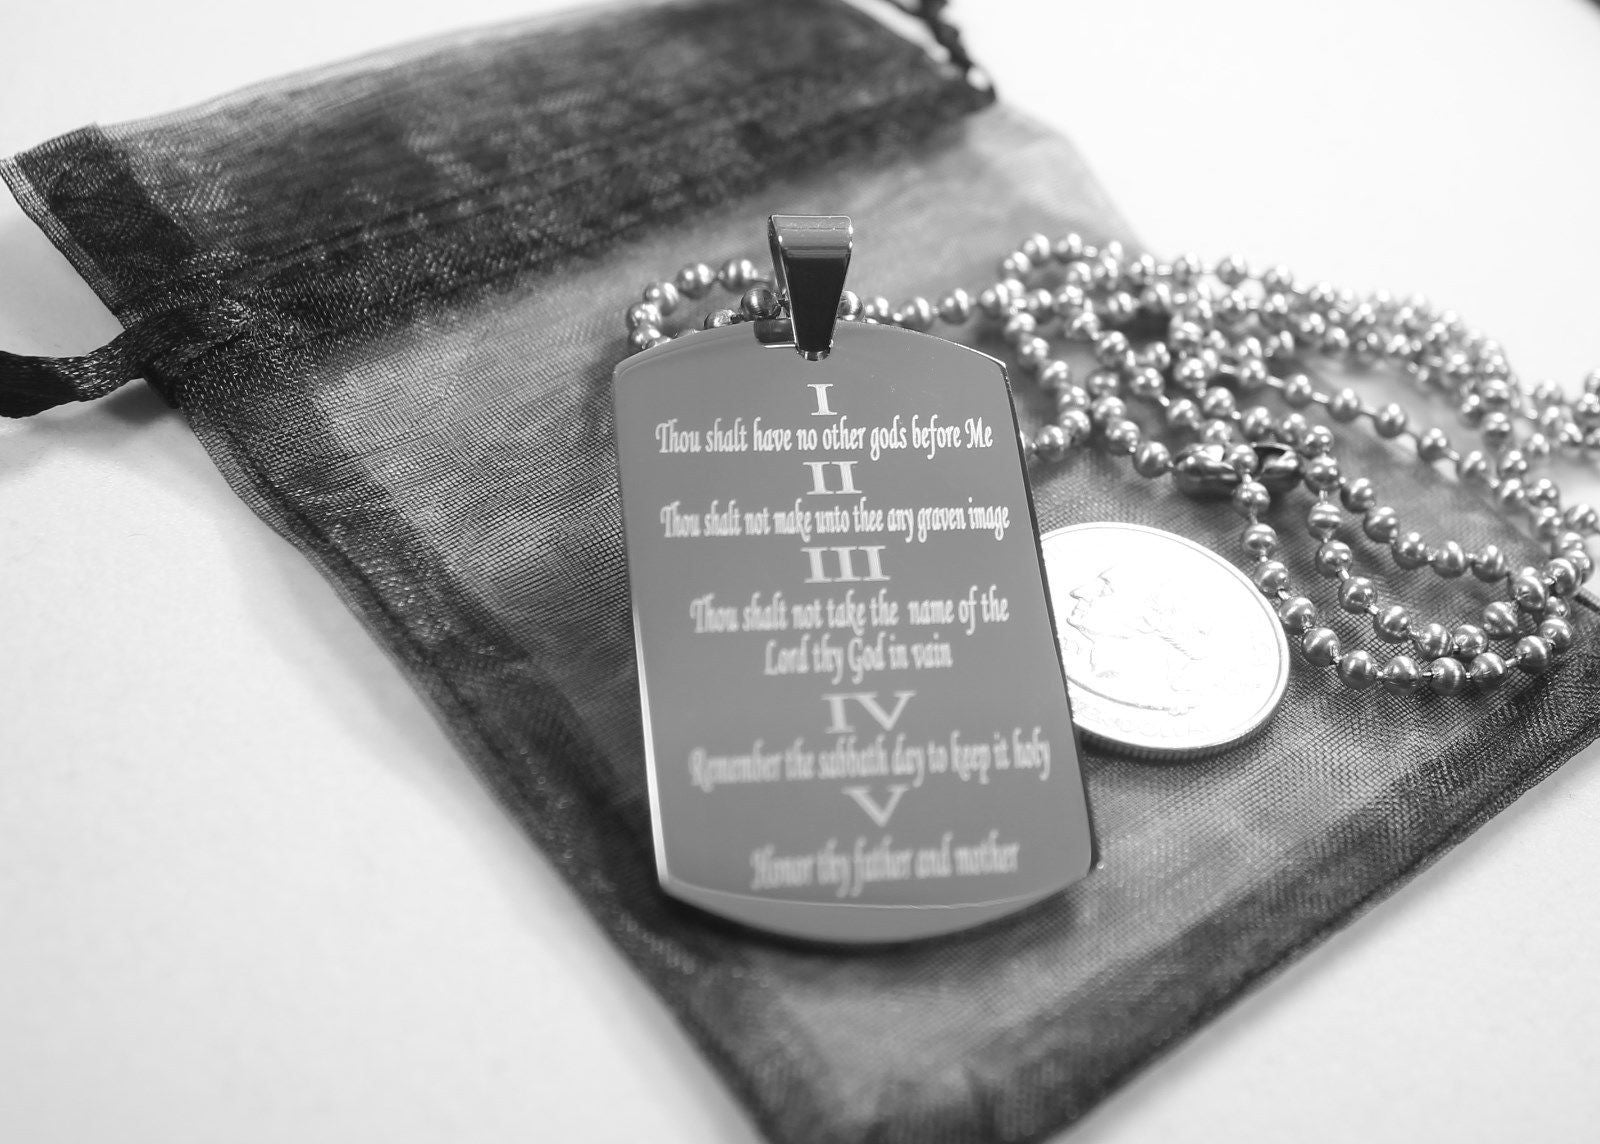 10 COMMANDMENTS SOLID THICK  STAINLESS STEEL BALL CHAIN SHINE PRAYER NECKLACE - Samstagsandmore